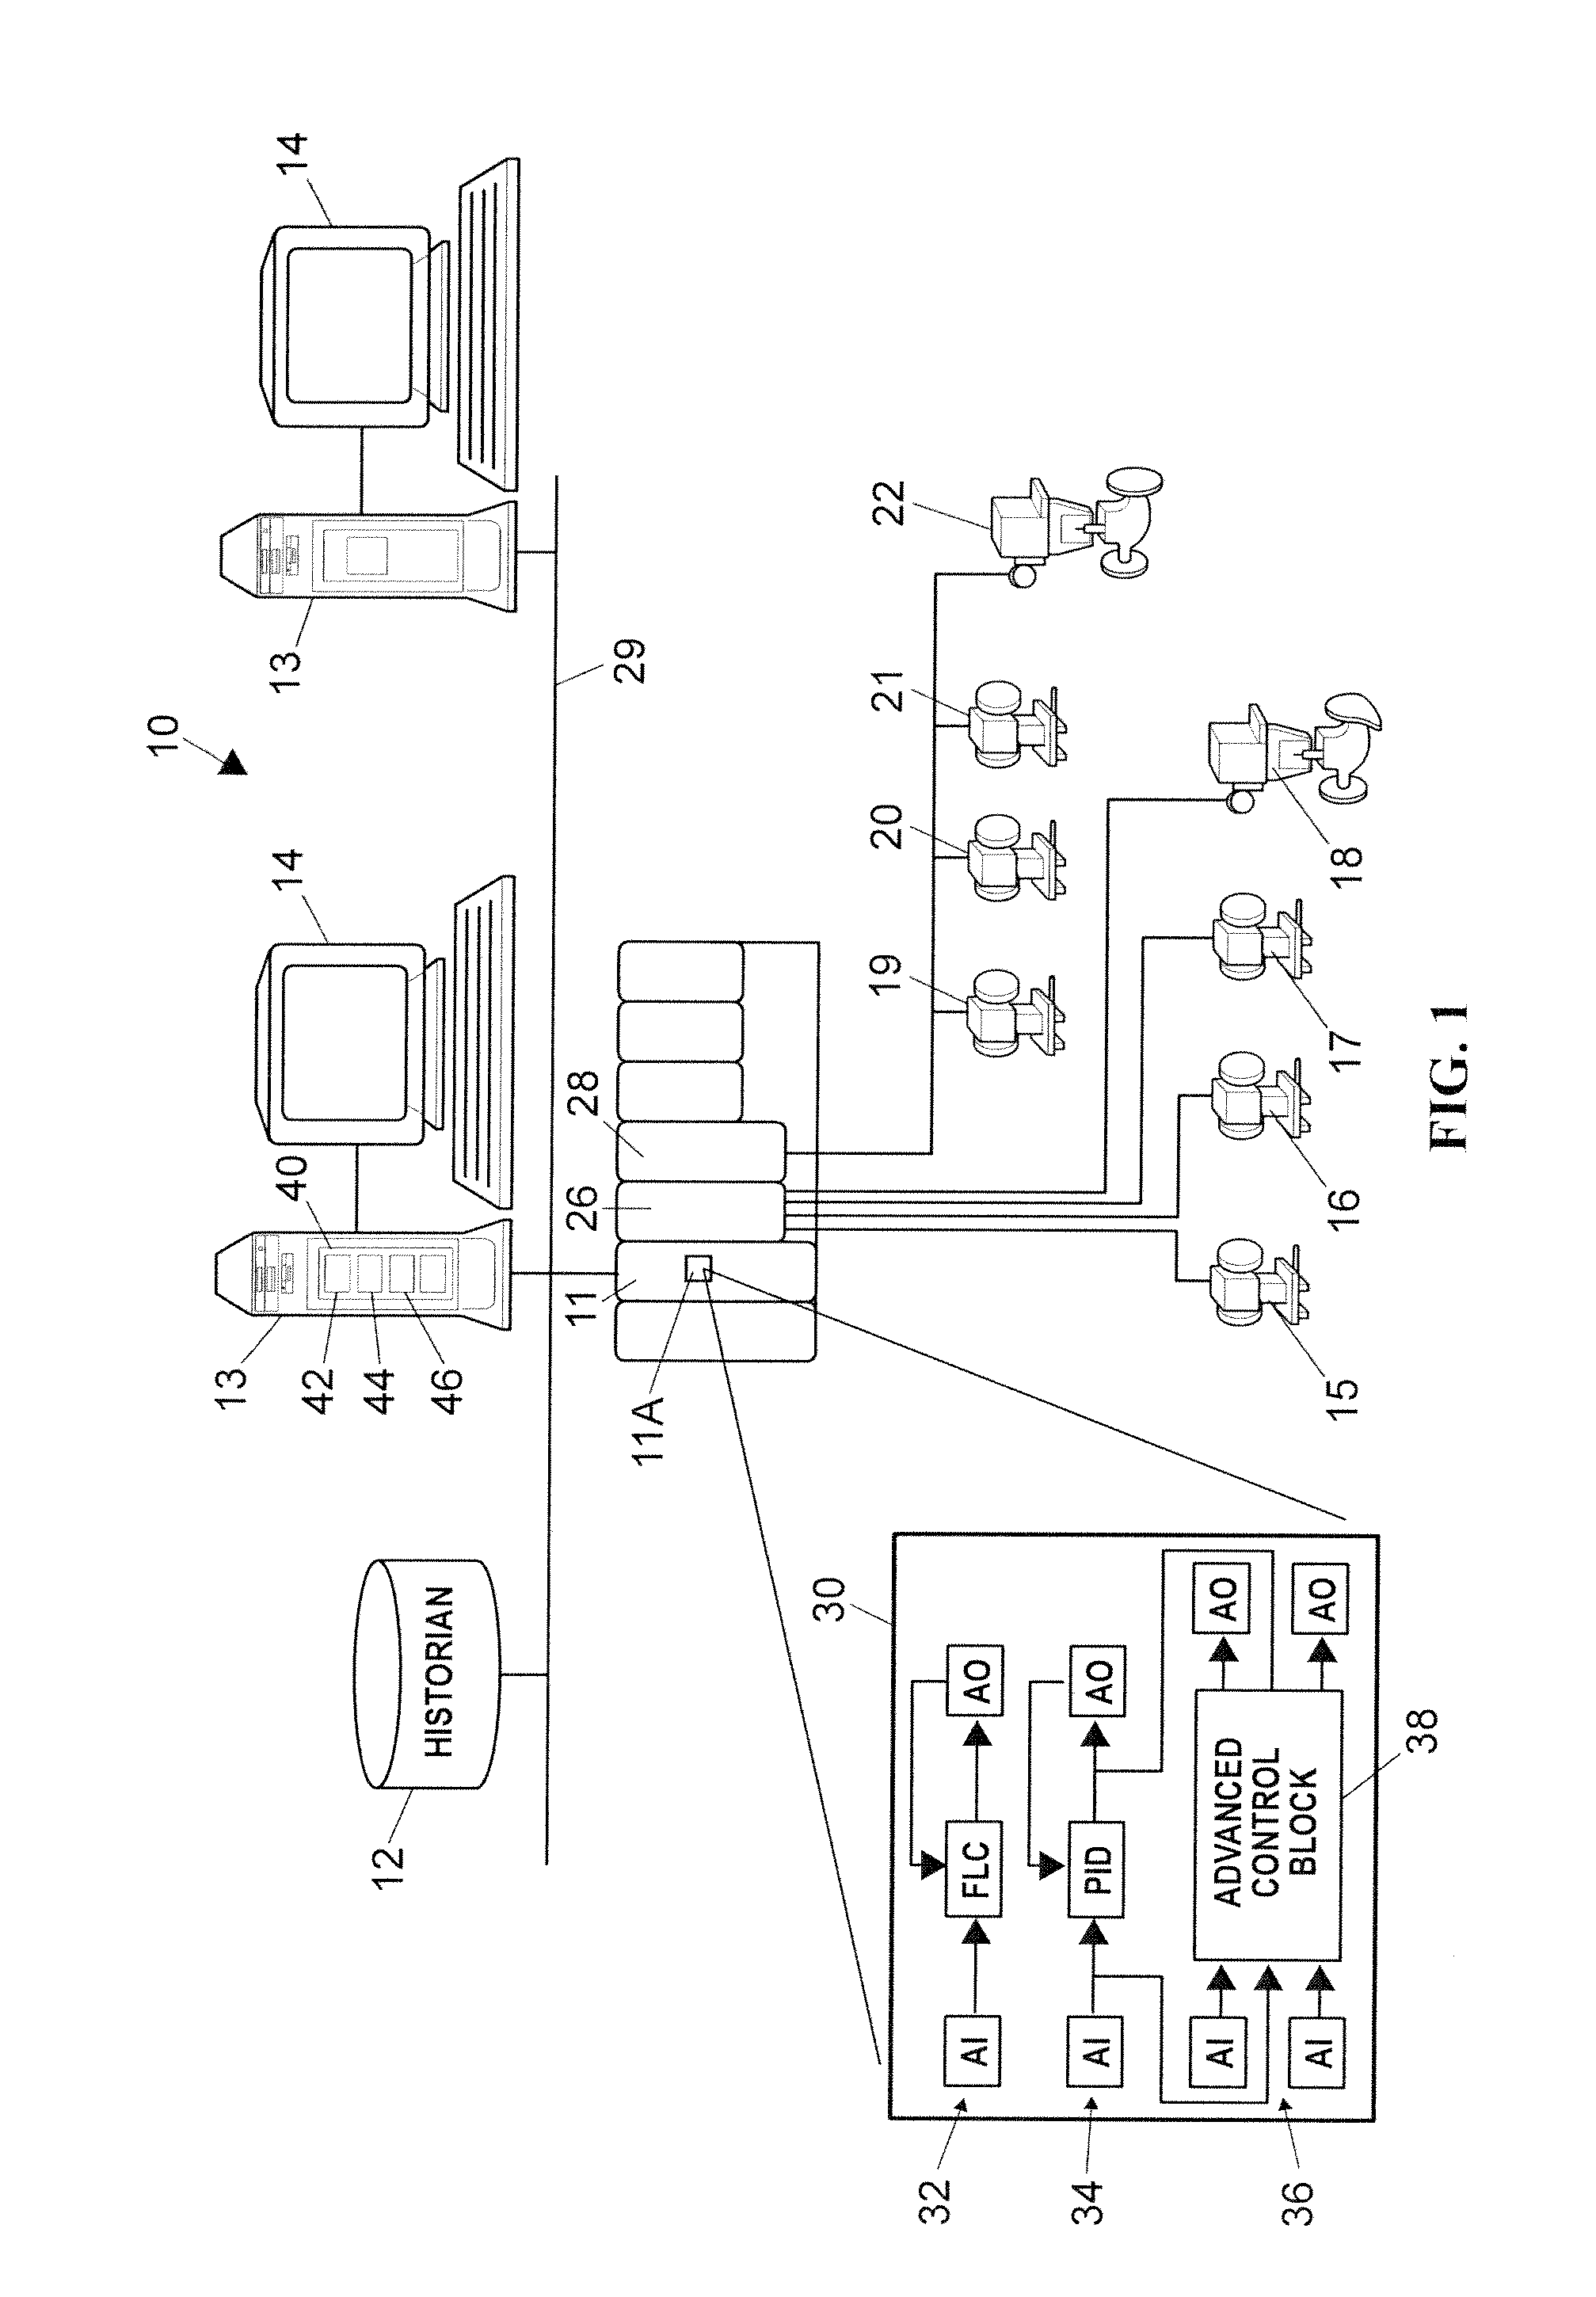 Model predictive controller with tunable integral component to compensate for model mismatch